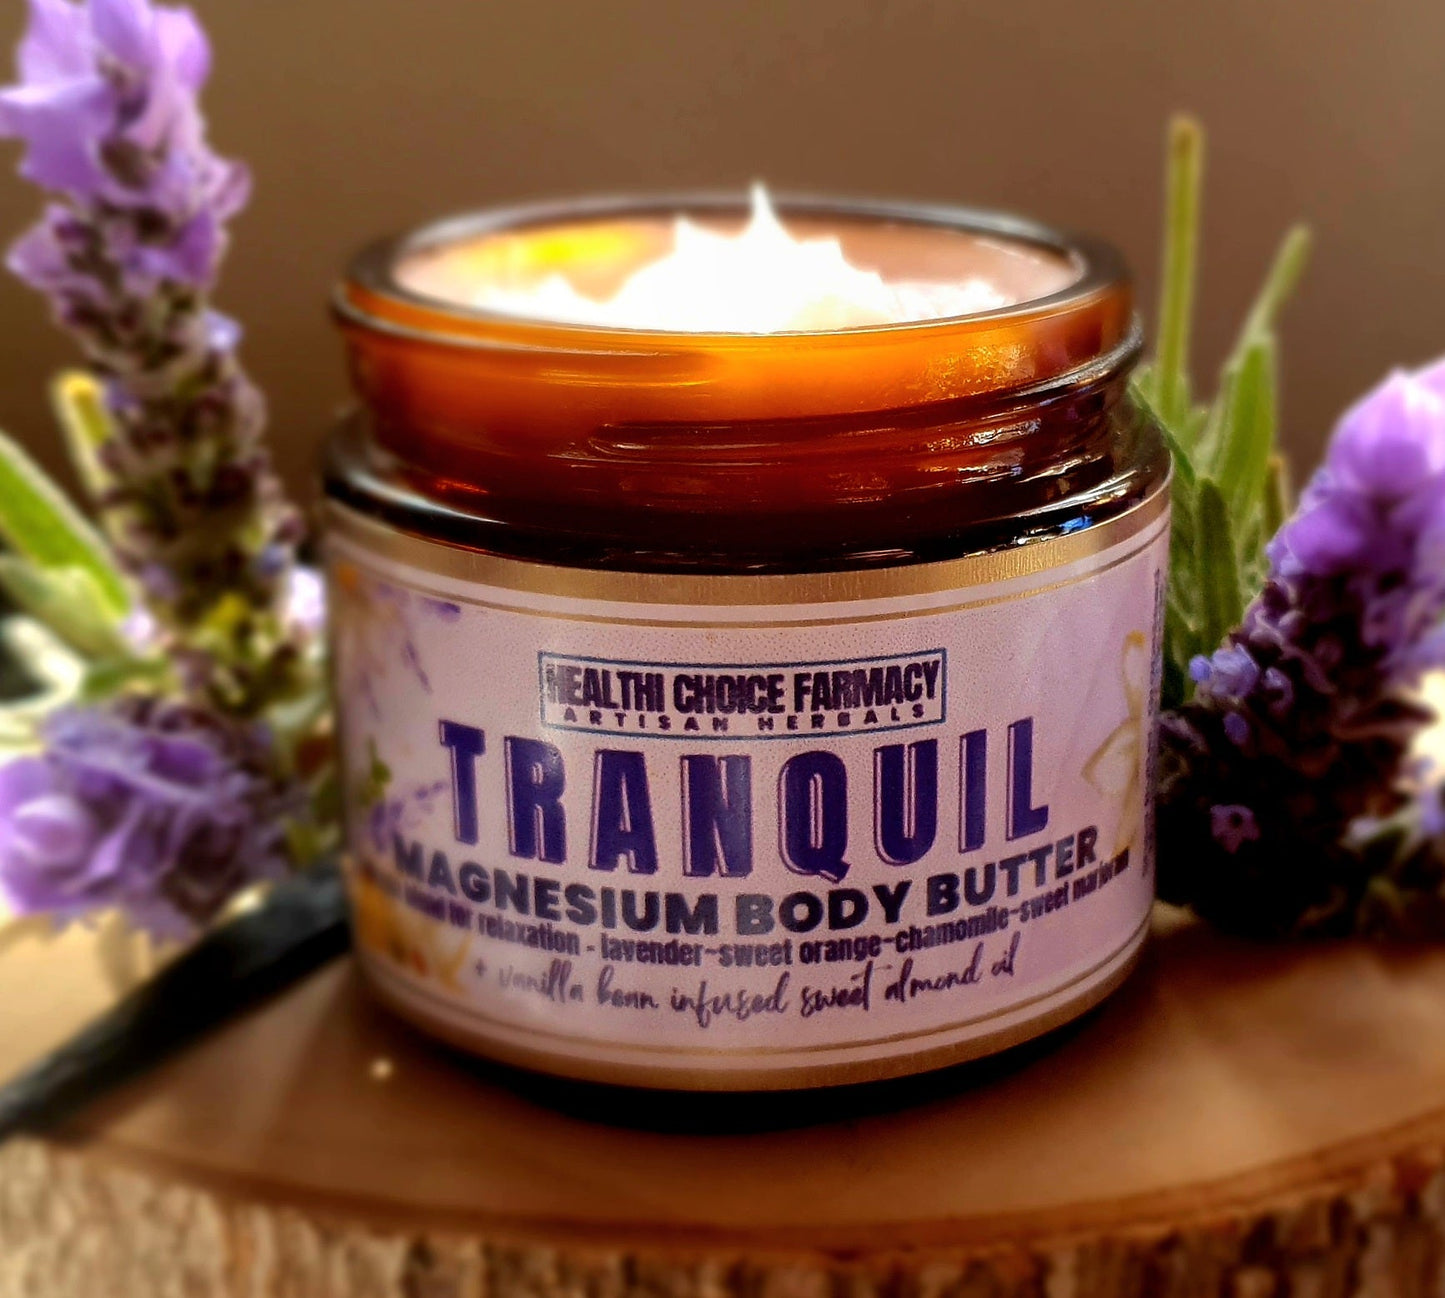 TRANQUIL Vanilla Bean infused Magnesium Butter ~ aroma blend for sleep - ALL NATURAL - Healthi Choice Farmacy